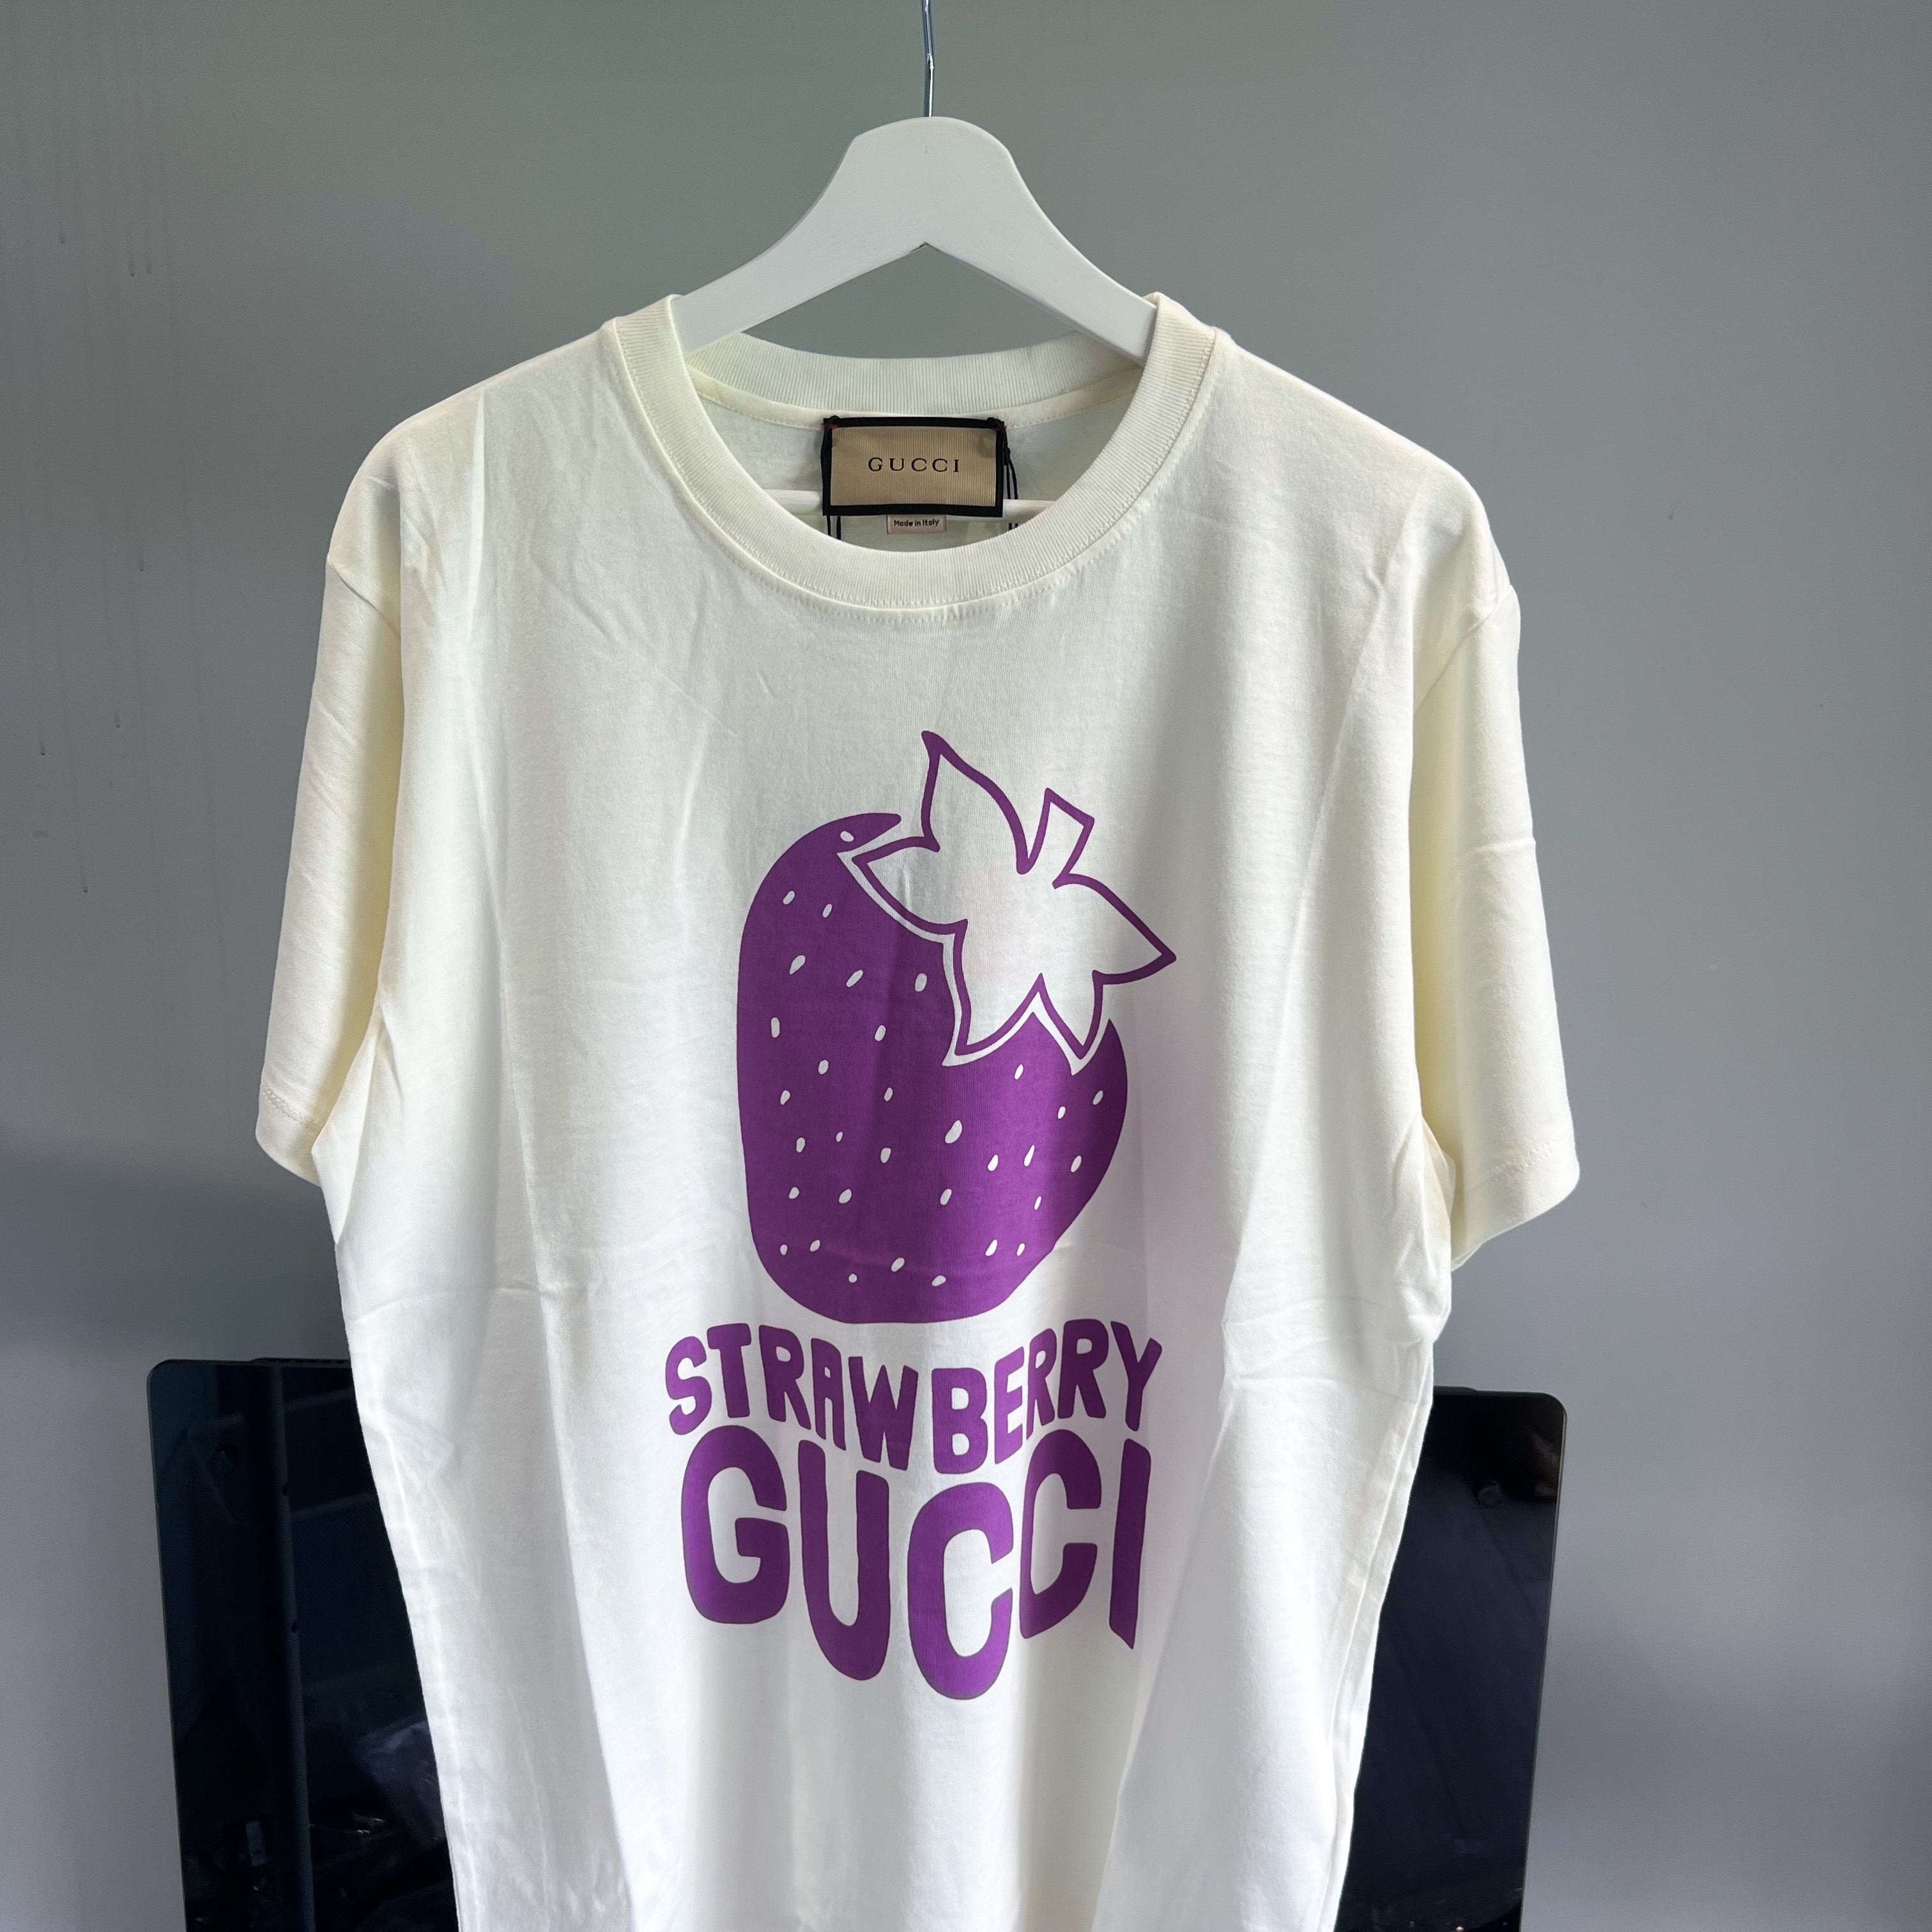 Gucci Strawberry Tee - Ivory